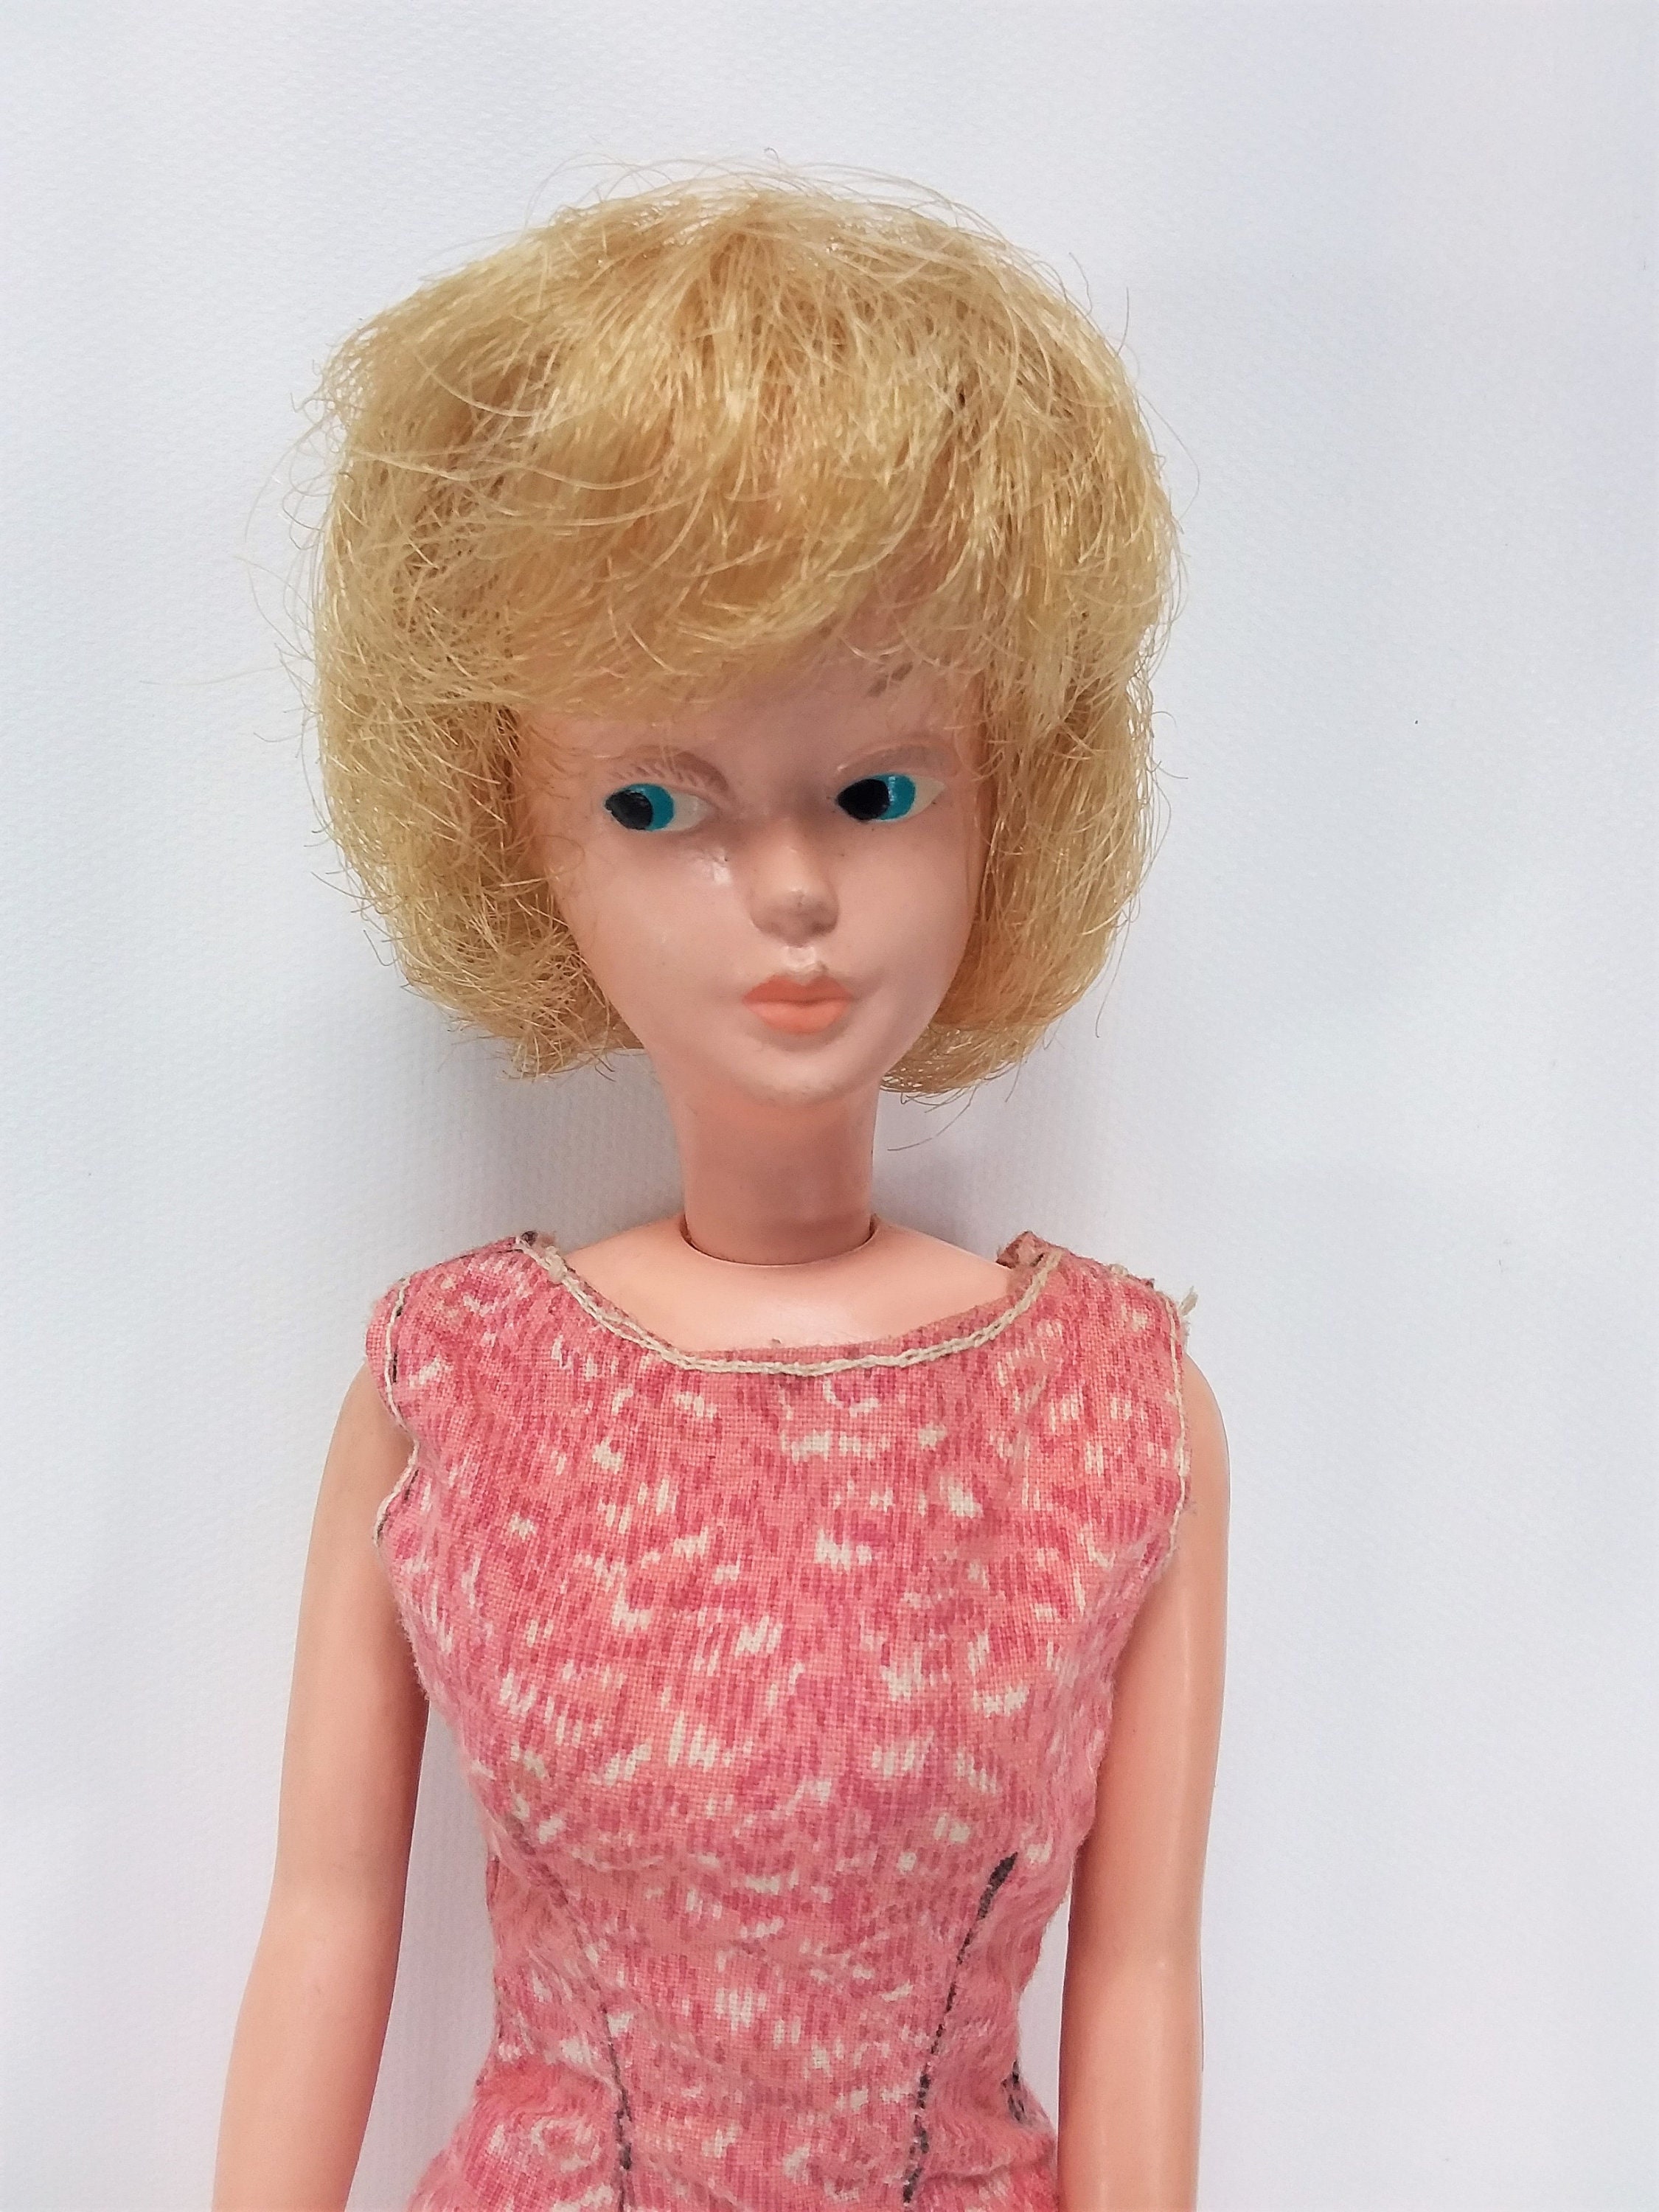 American Character Mary Makeup Doll, Friend of Tressy C. 1964 